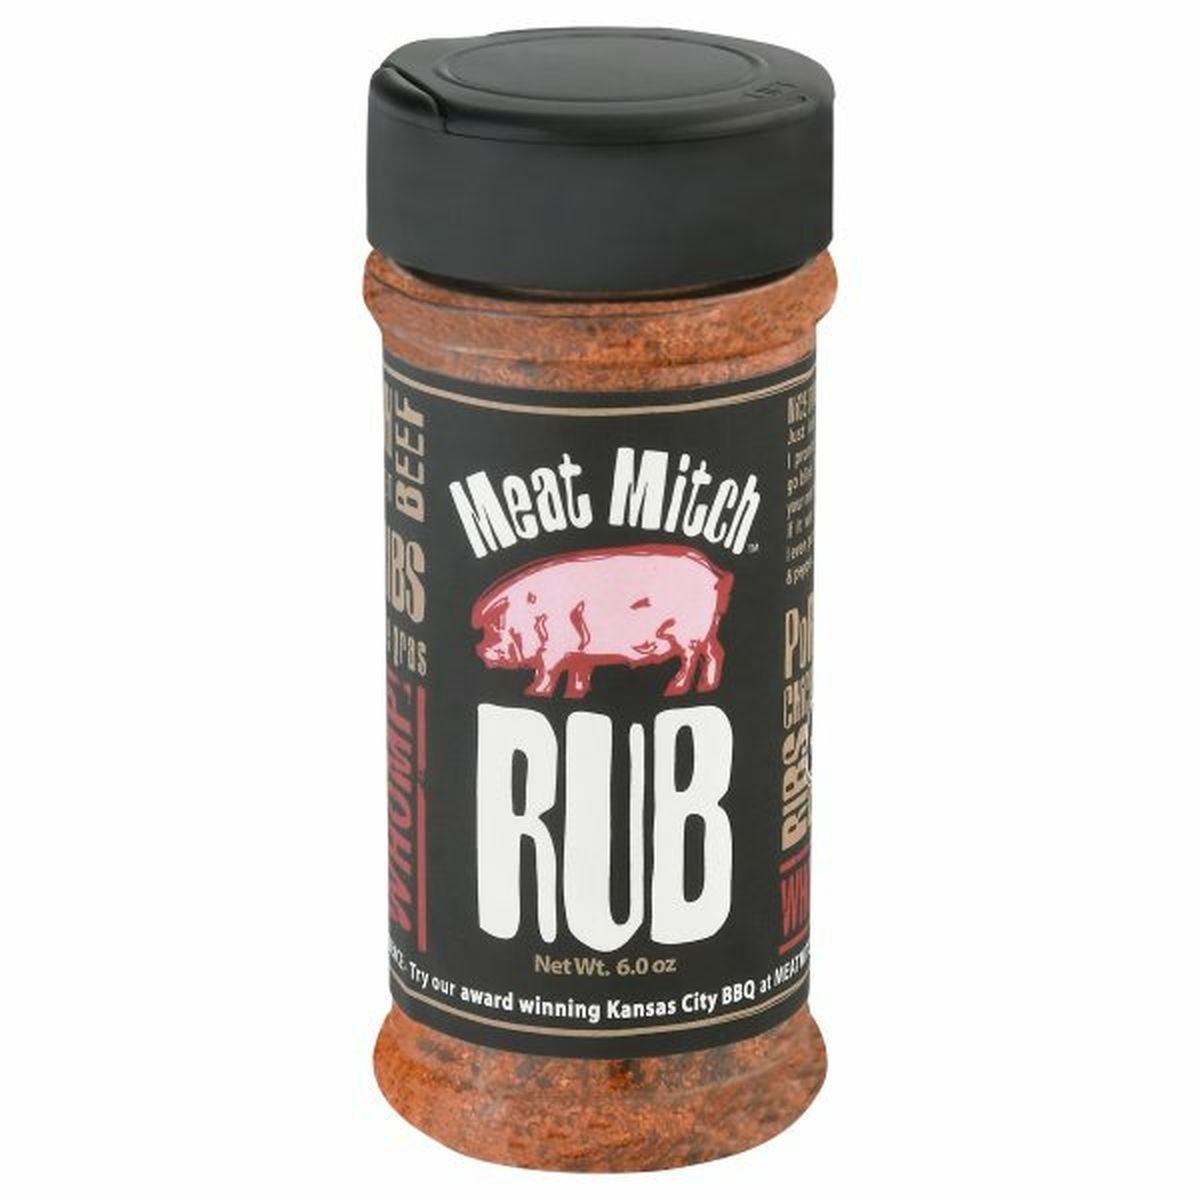 Calories in Meat Mitch Rub